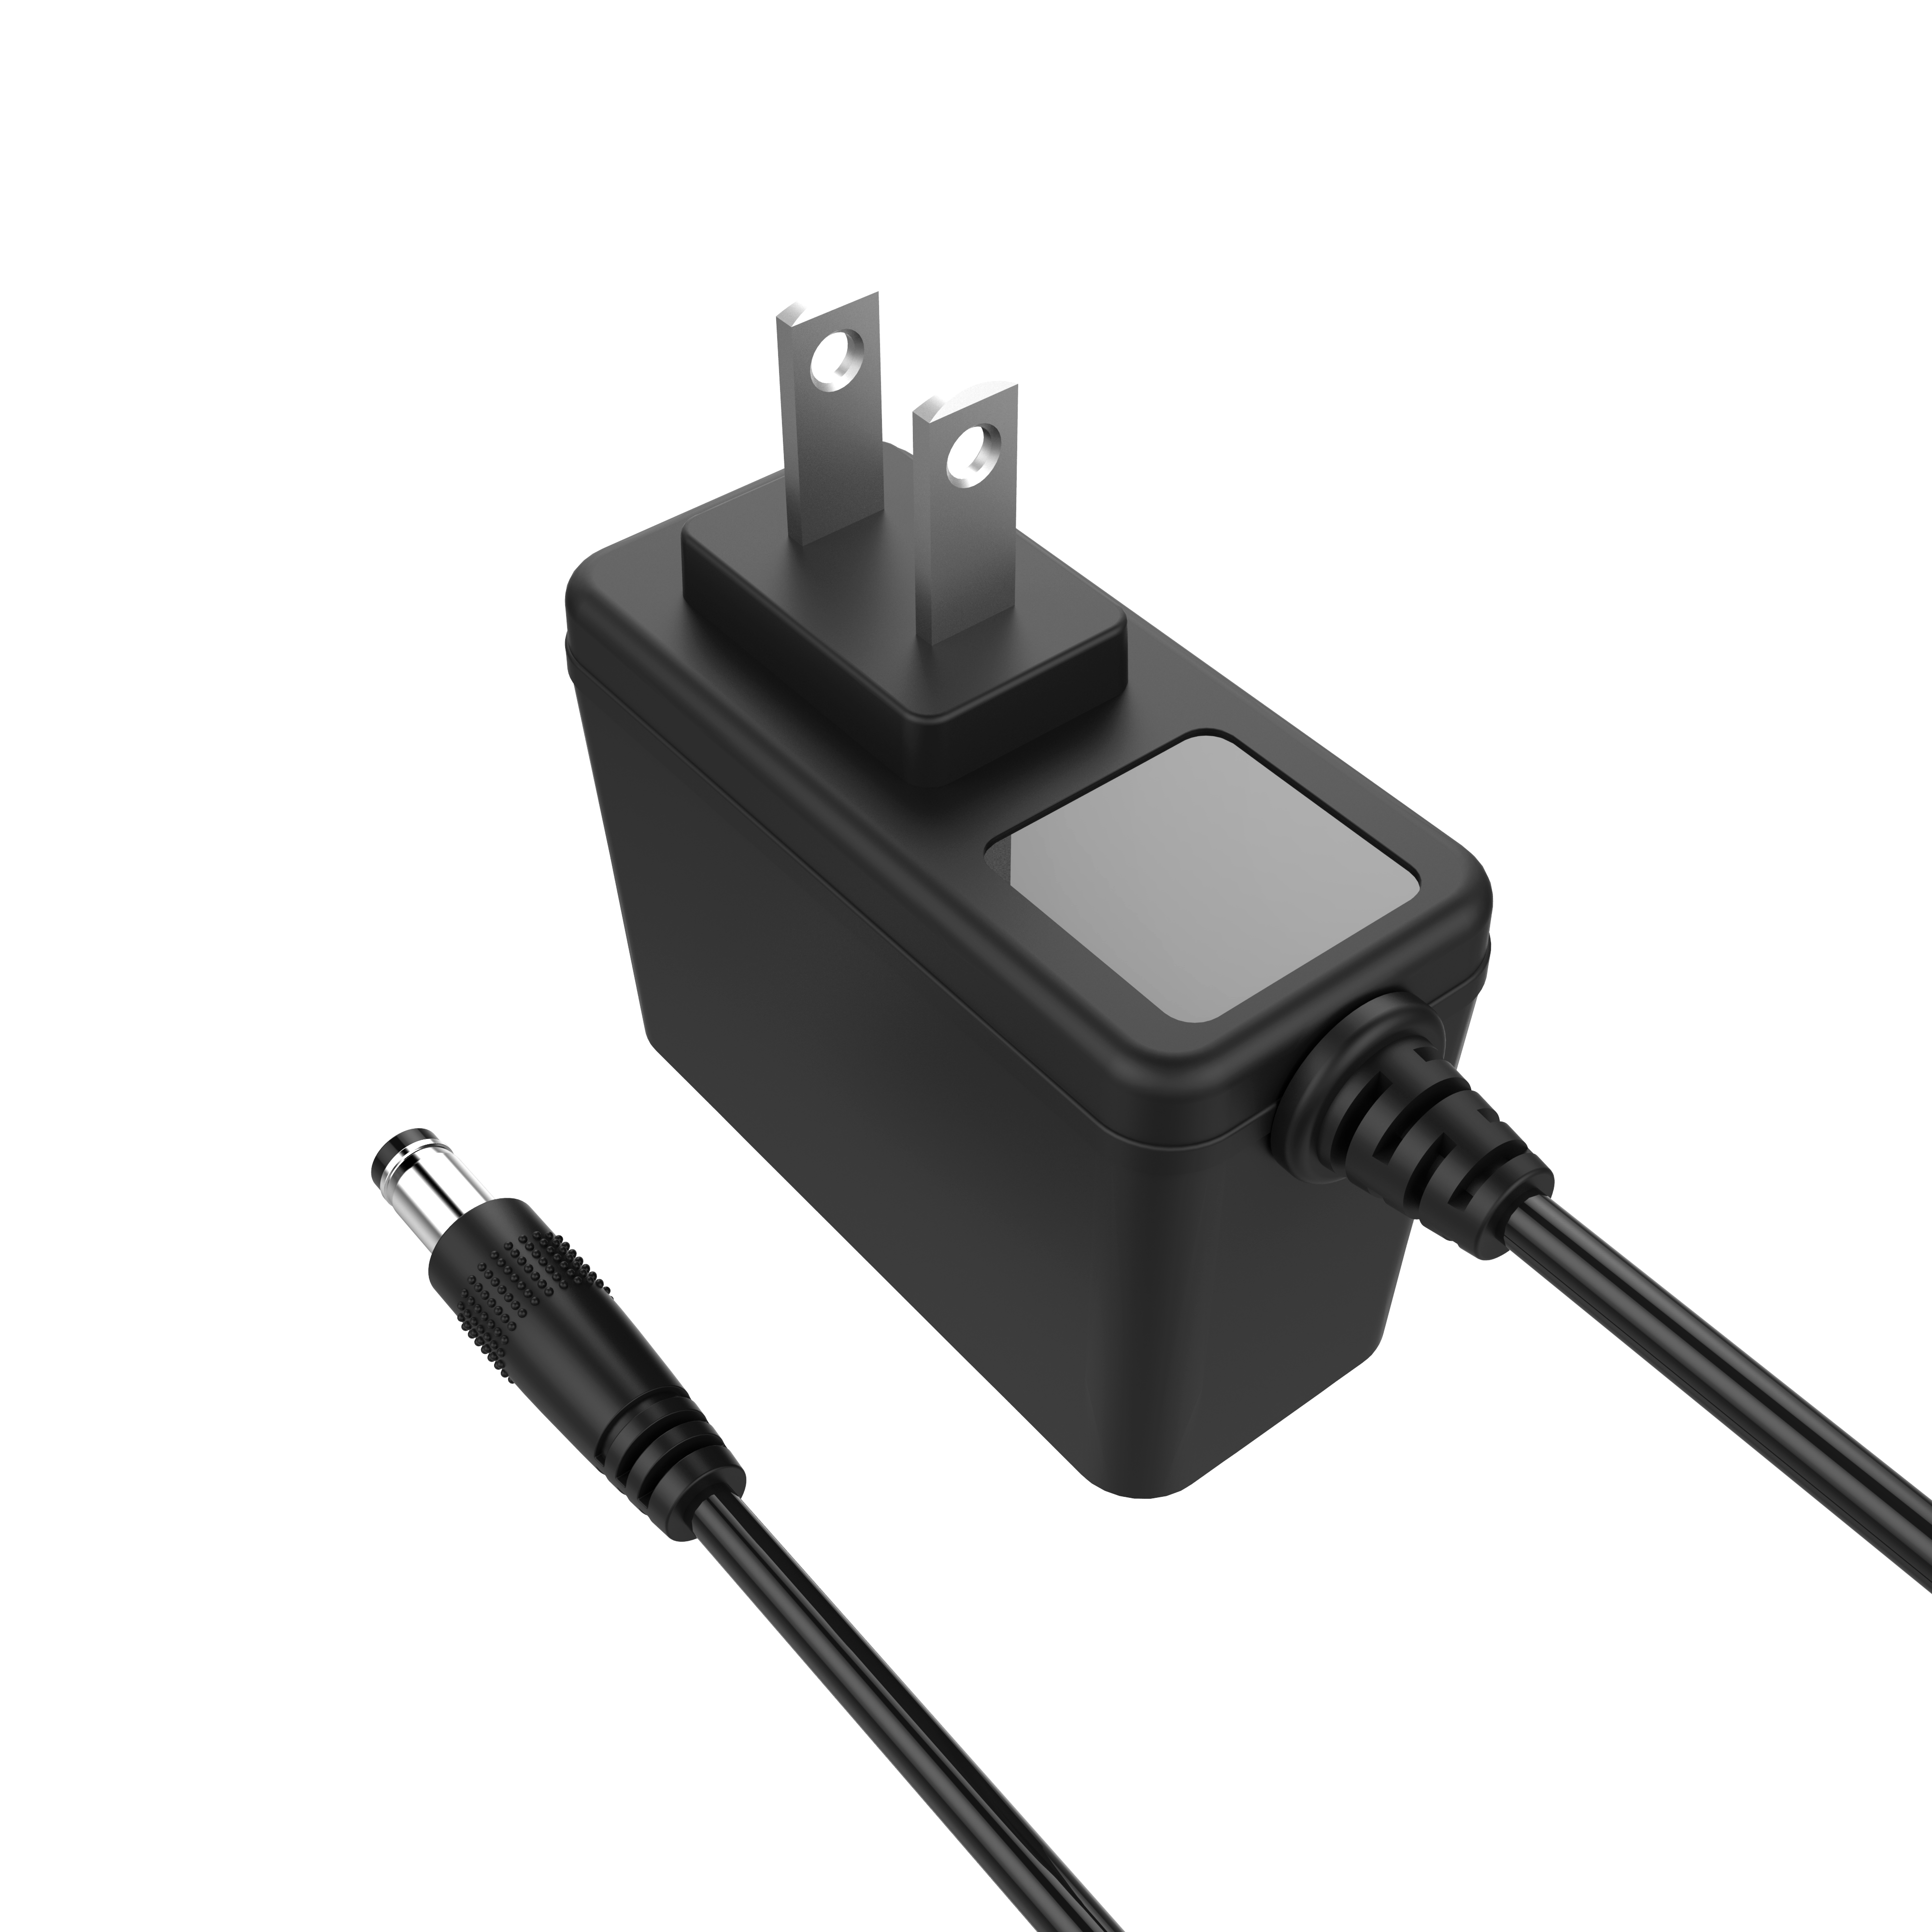 12W 5v2.1a 2a 12v1a Wall type Switching Power Adapter For Mobile Phone with UL62368, CB/CE/GS/EMC/LVD/SAA/KC/FCC/PSE/CCC safety